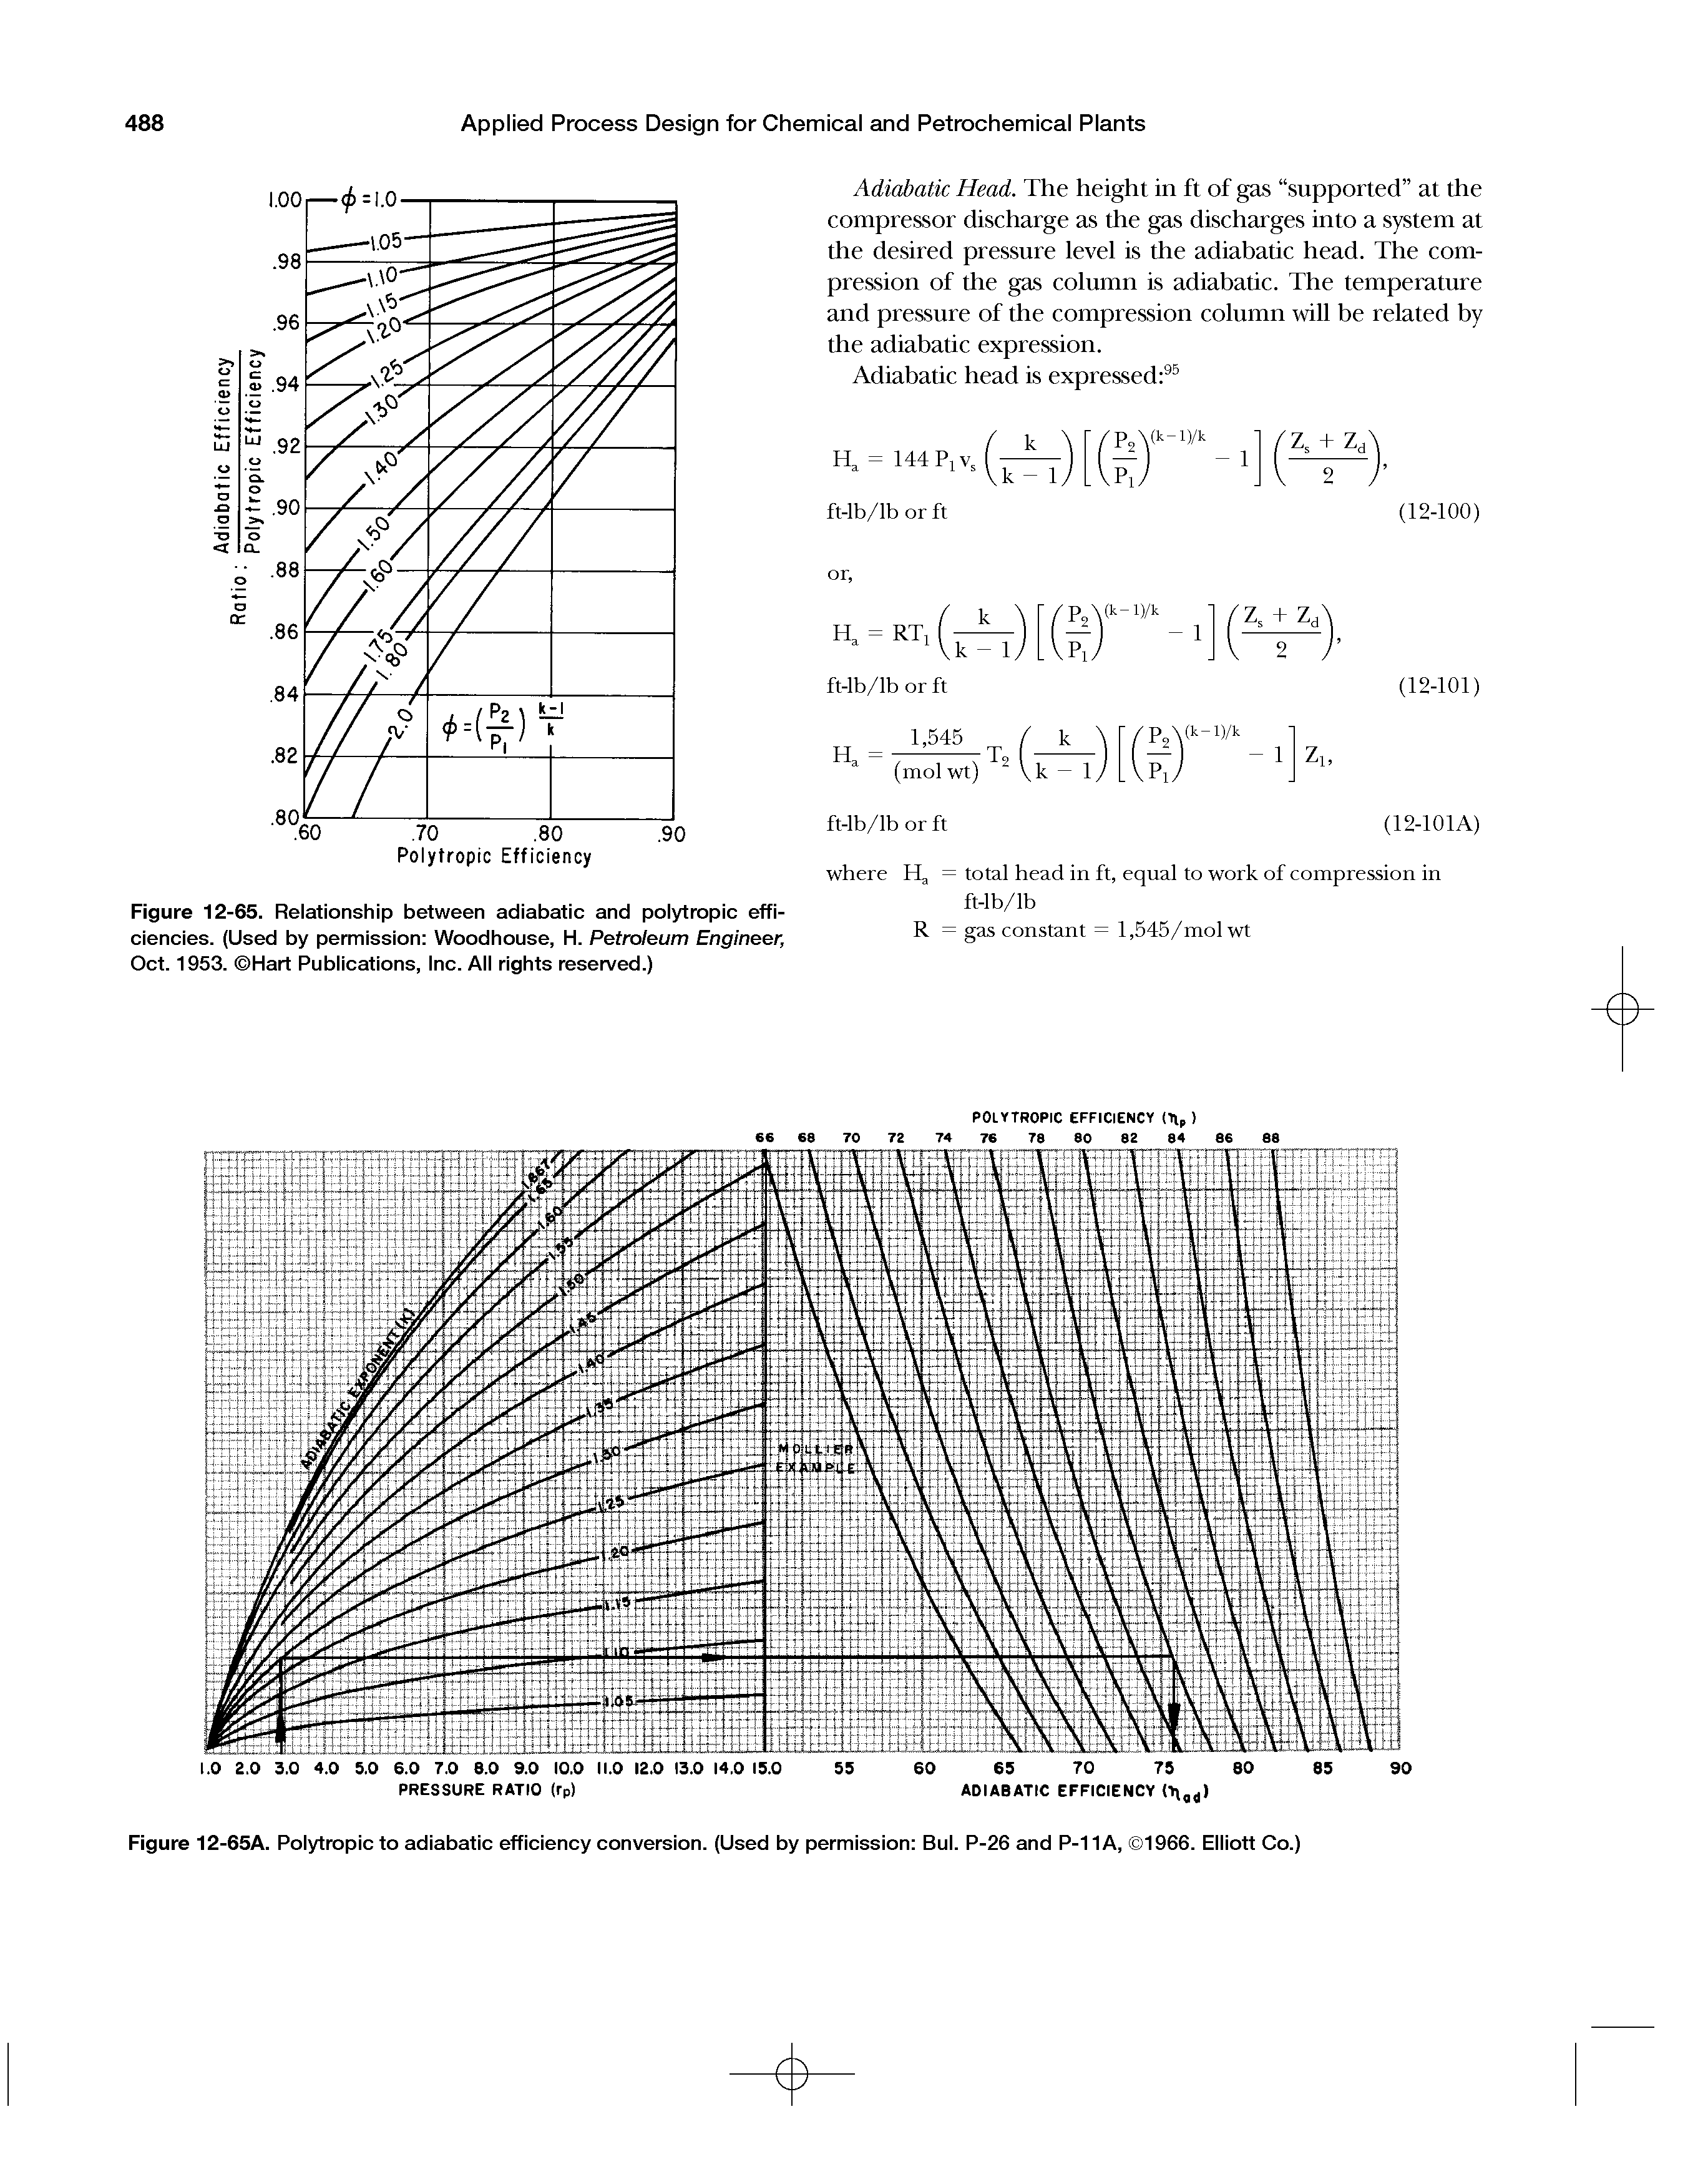 Figure 12-65A. Polytropic to adiabatic efficiency conversion. (Used by permission Bui. P-26 and P-11A, 1966. Elliott Co.)...